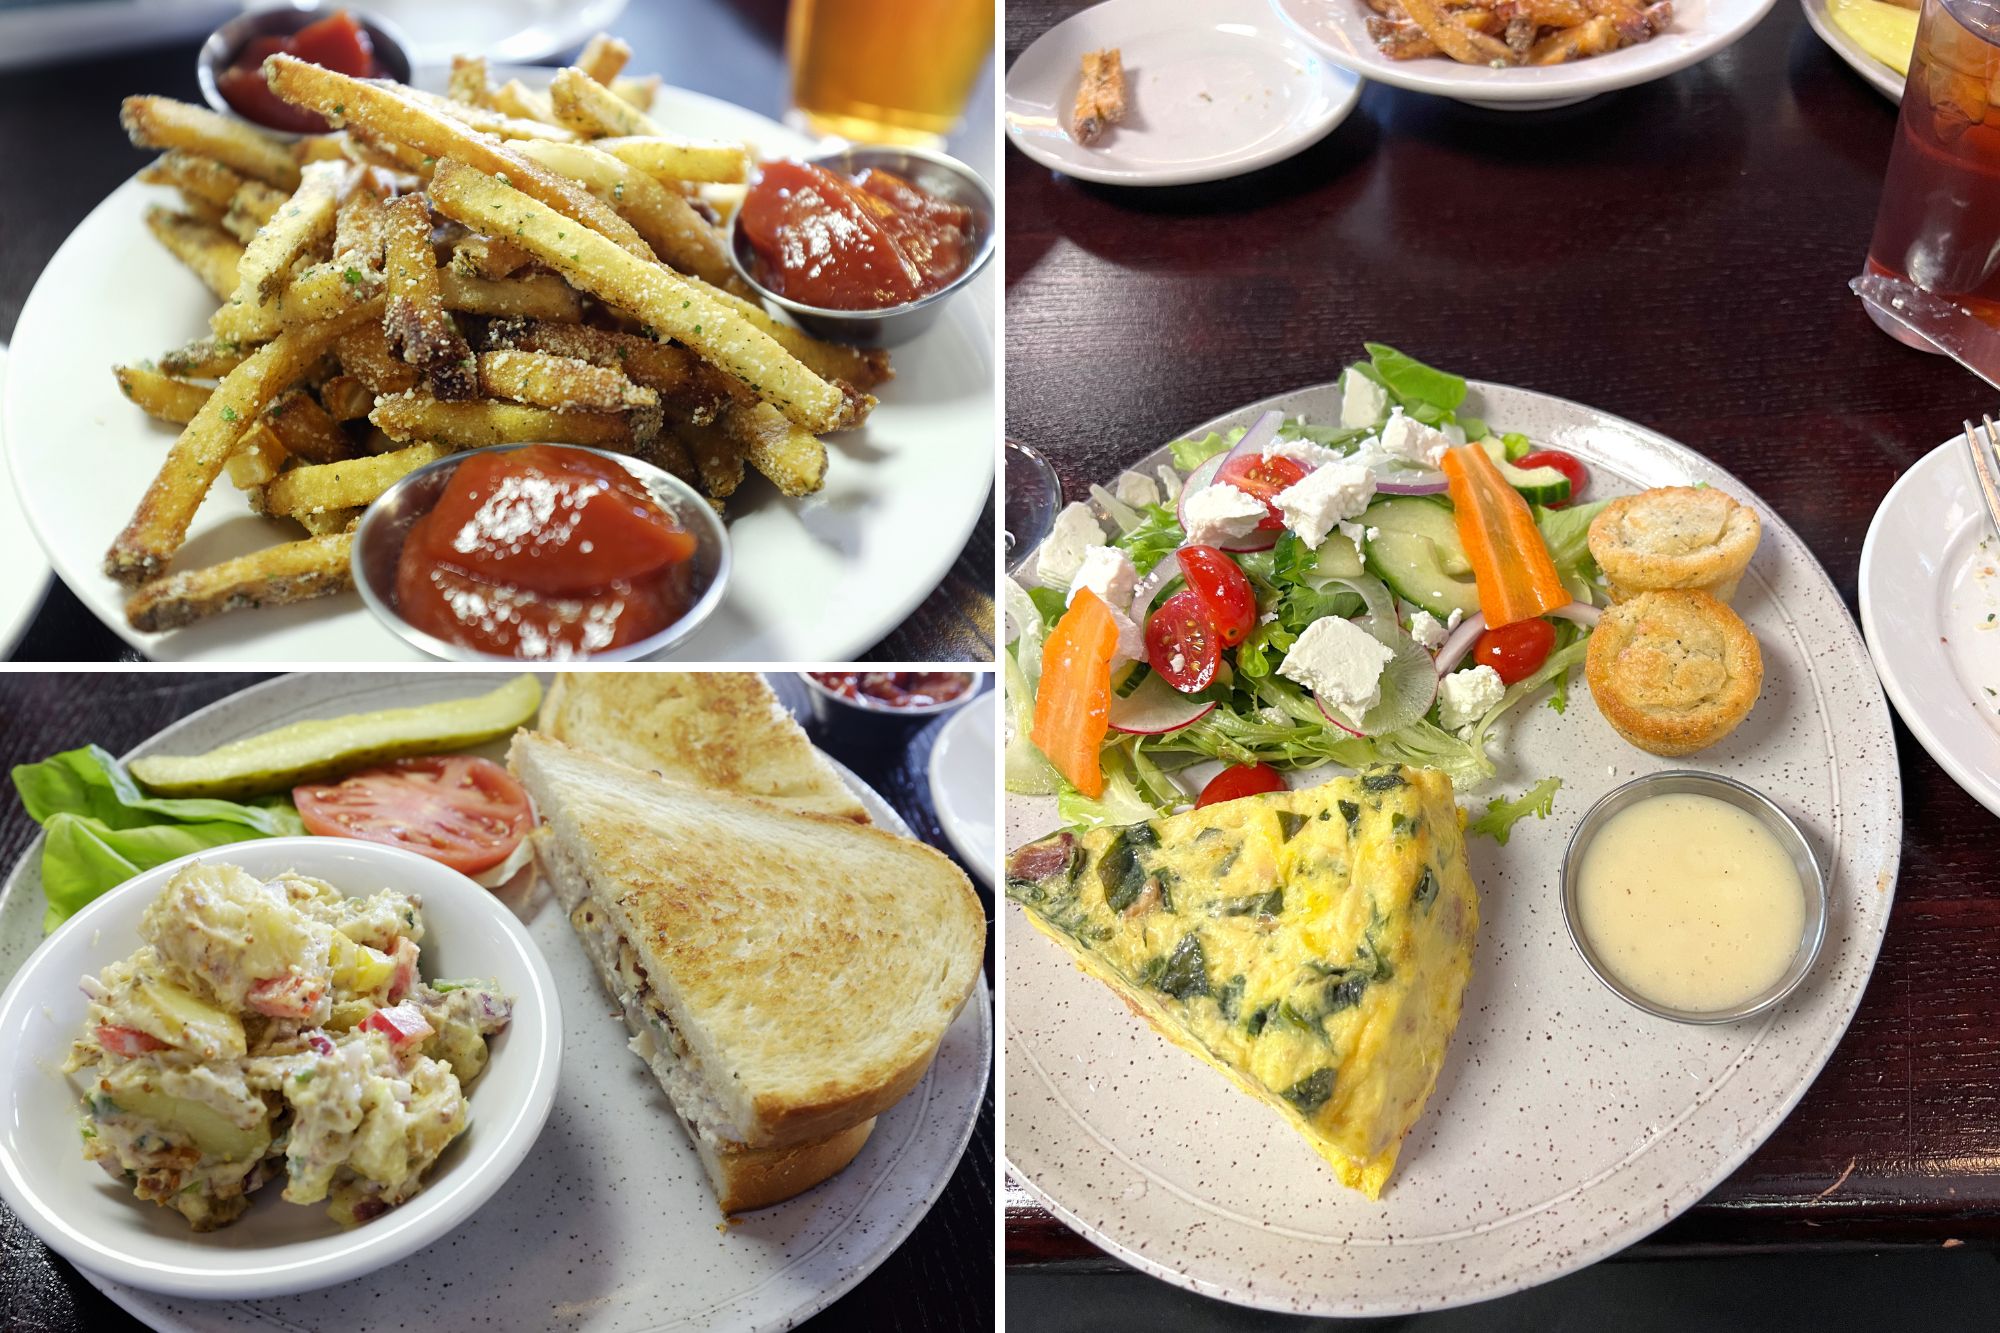 Gourmet and Company's Truffle Fries, Chicken Salad, and Quiche